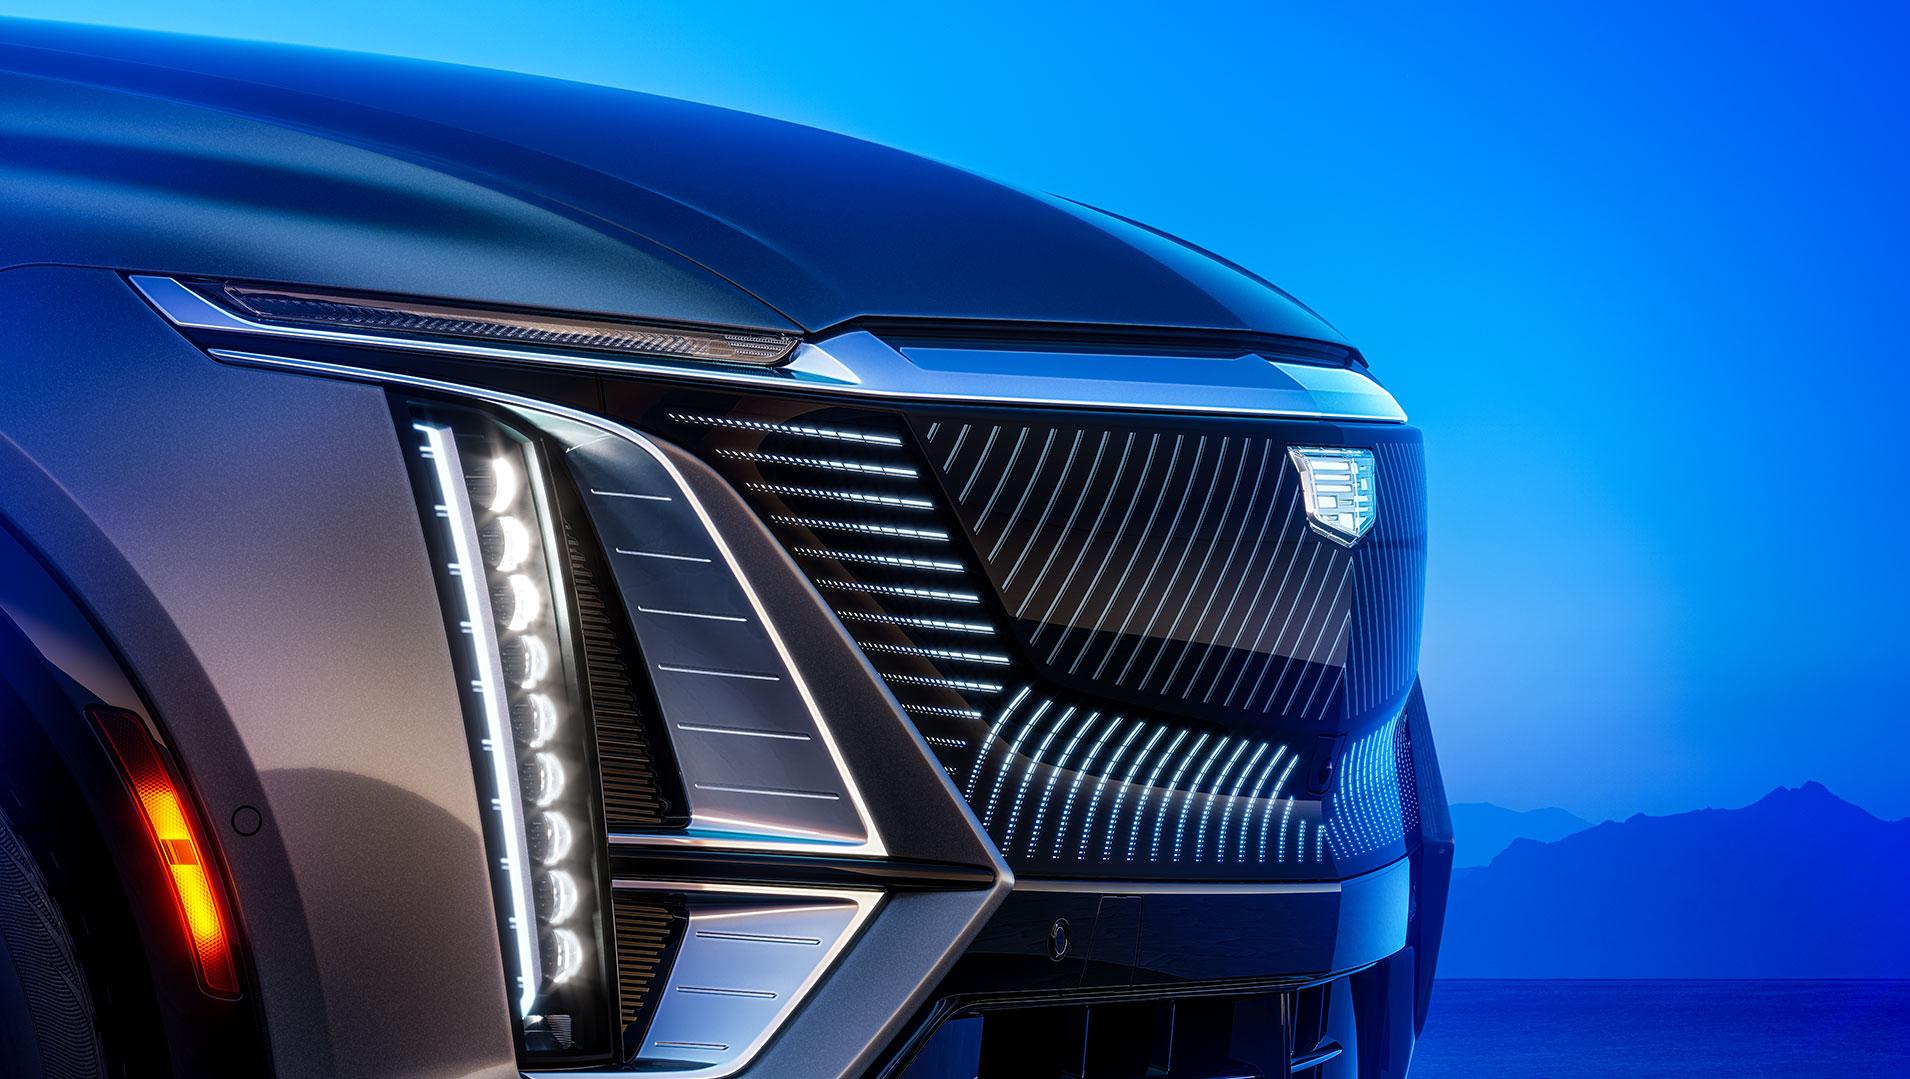 The Black Crystal Shield and LED Headlamps of the Cadillac LYRIQ